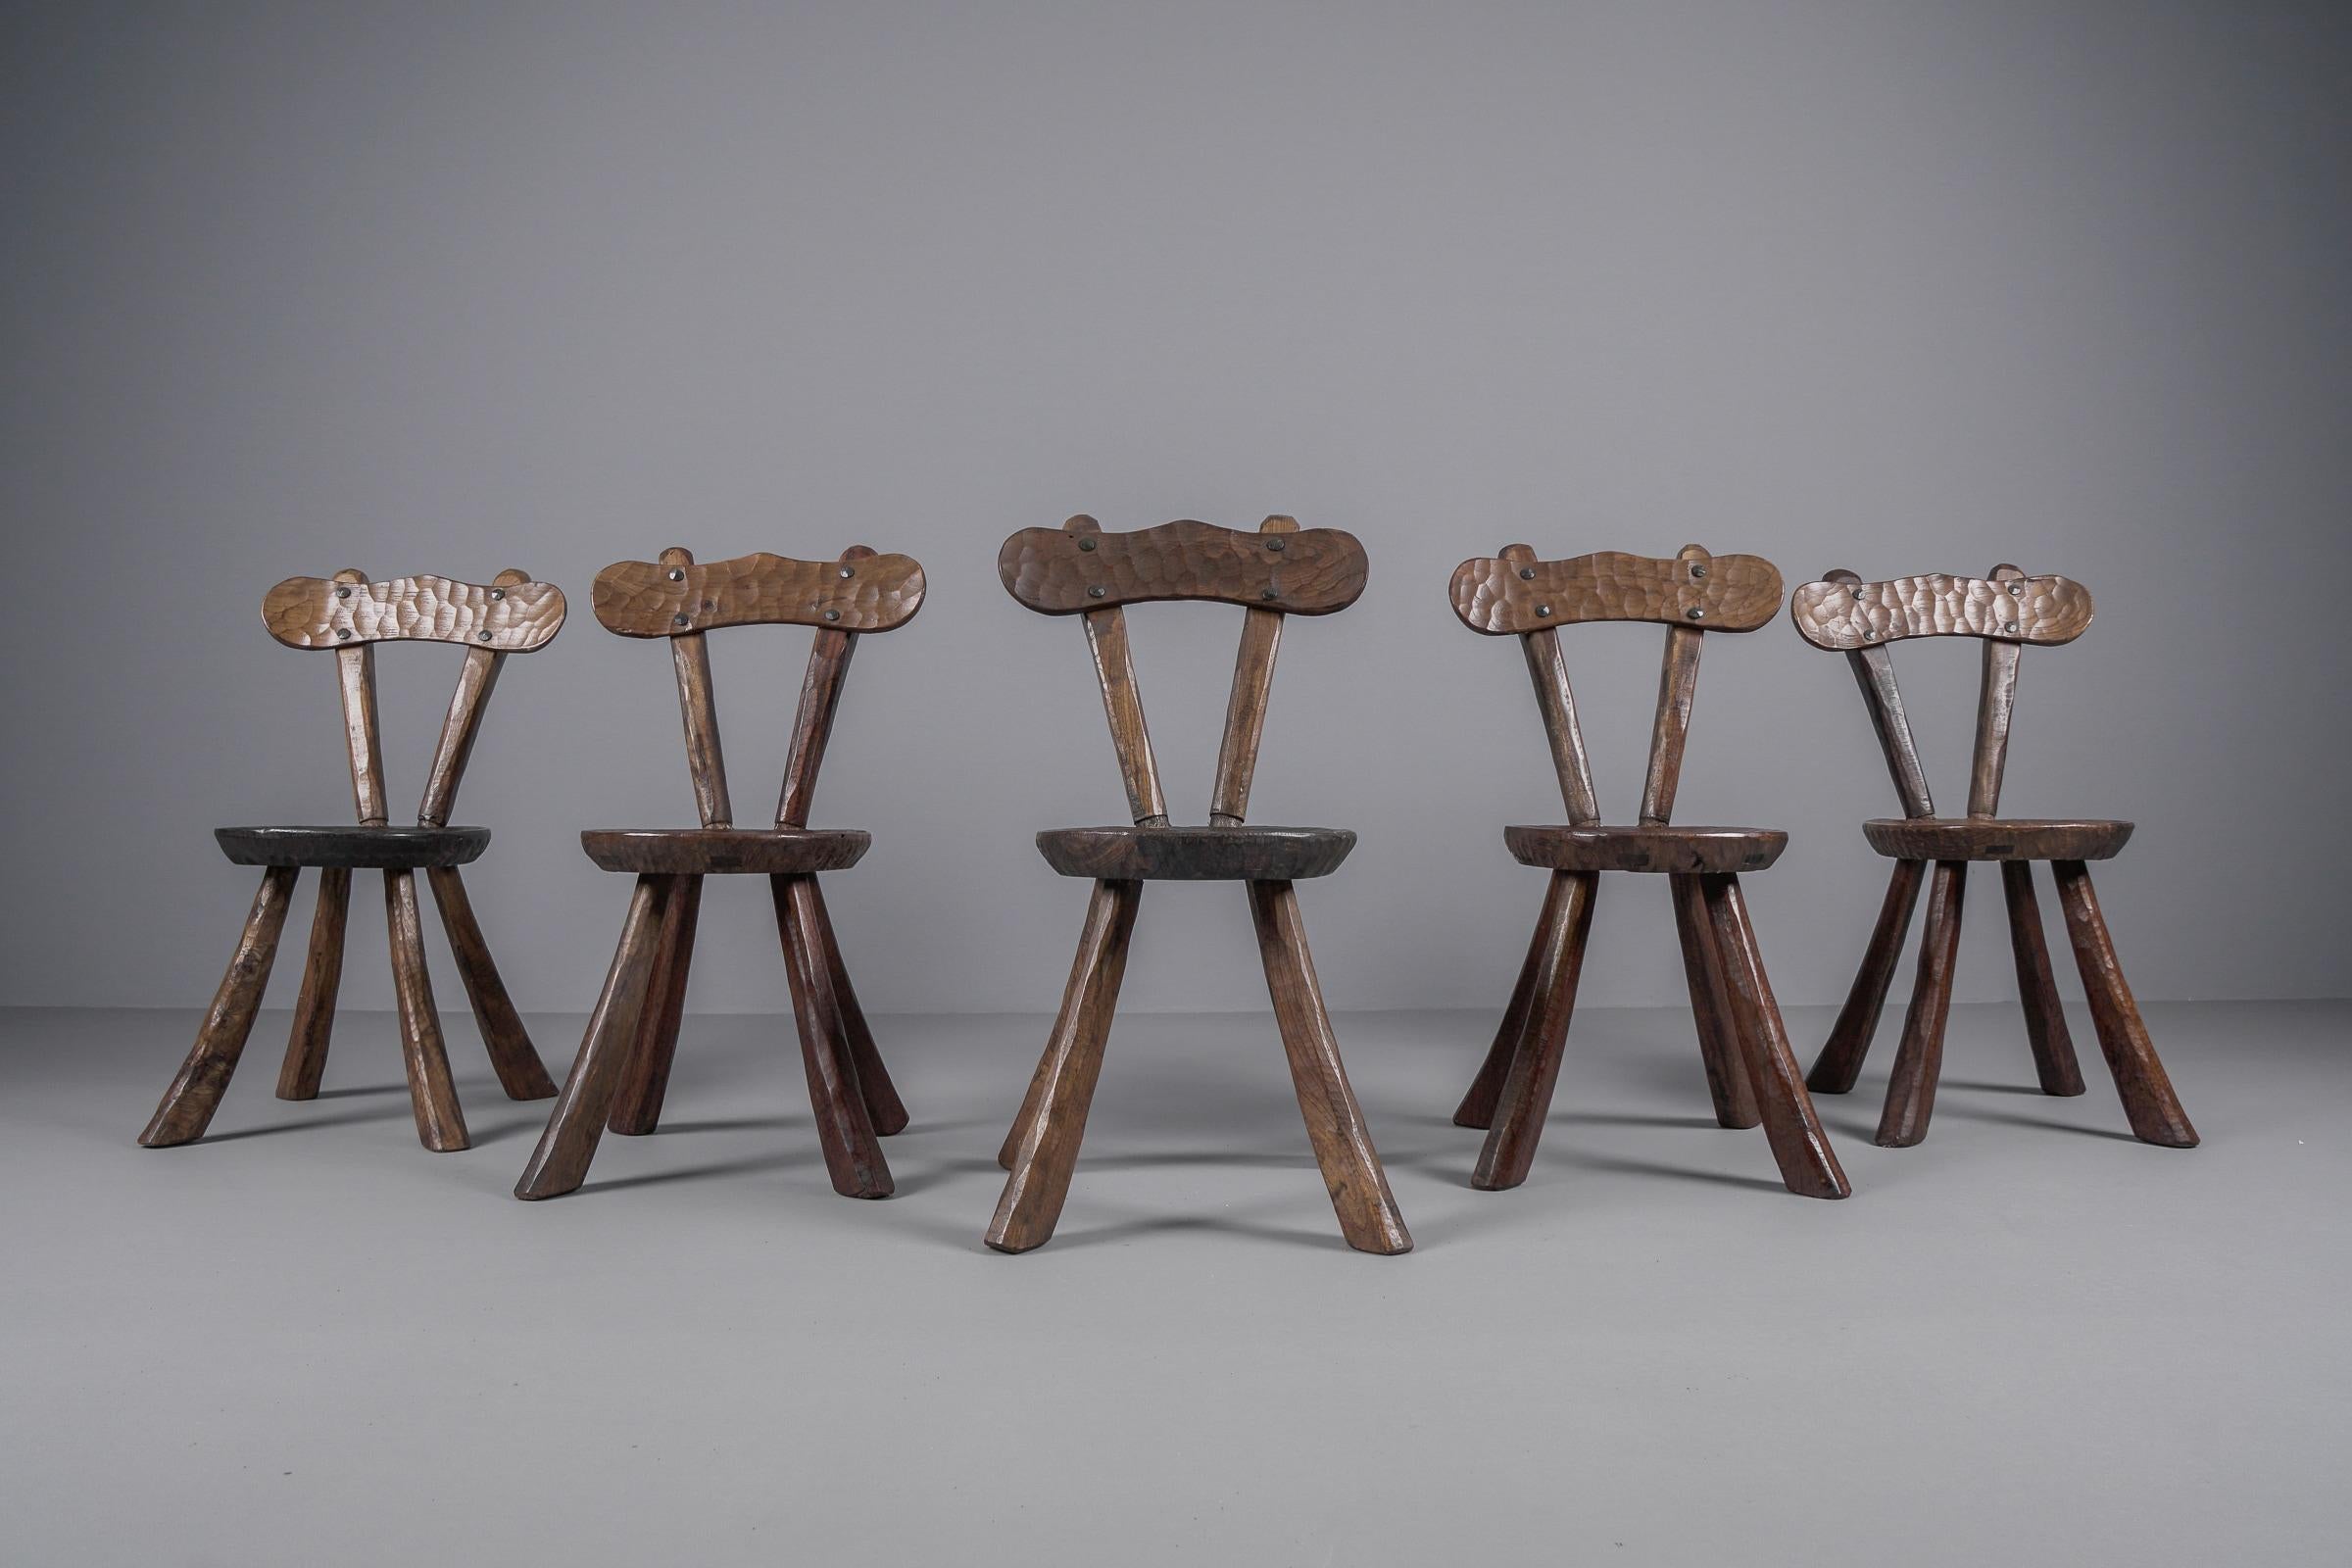 Set of 5 Brutalist Rustic Modern Sculptured Chairs i. t. Style of Alexandre Noll For Sale 1